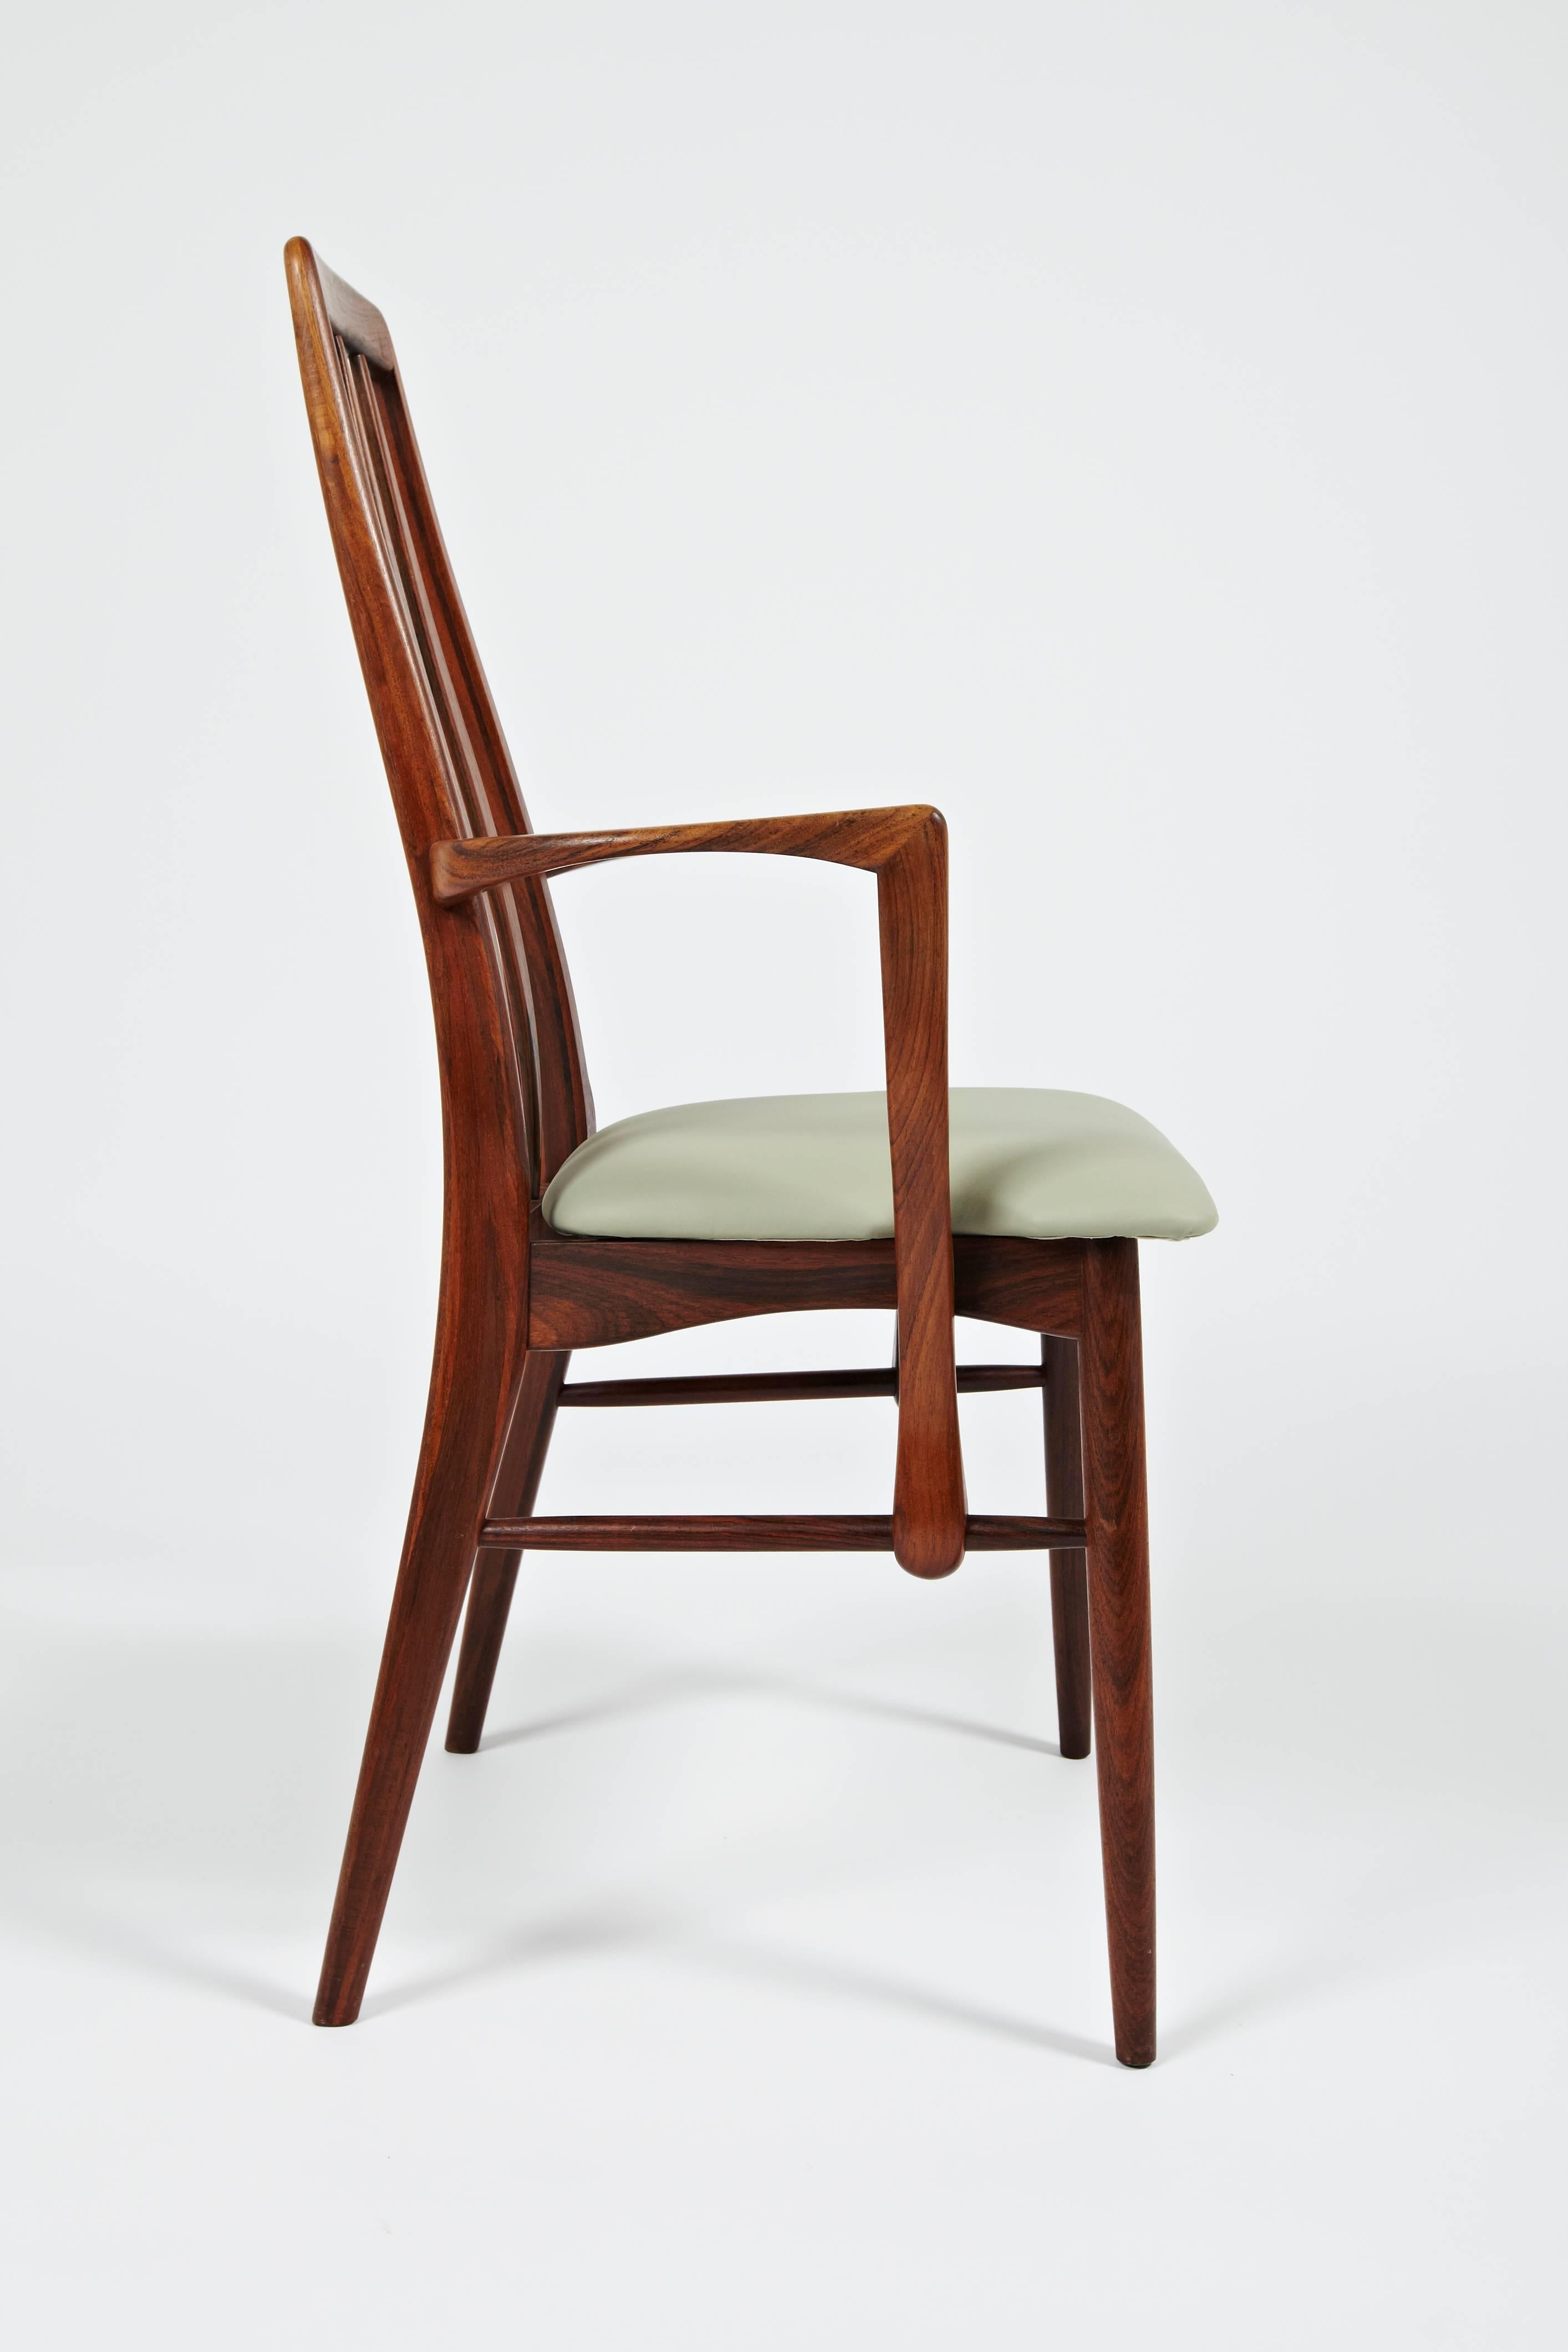 Scandinavian Modern Niels Kofoed Rosewood Dining Chair with Arms, circa 1964 For Sale